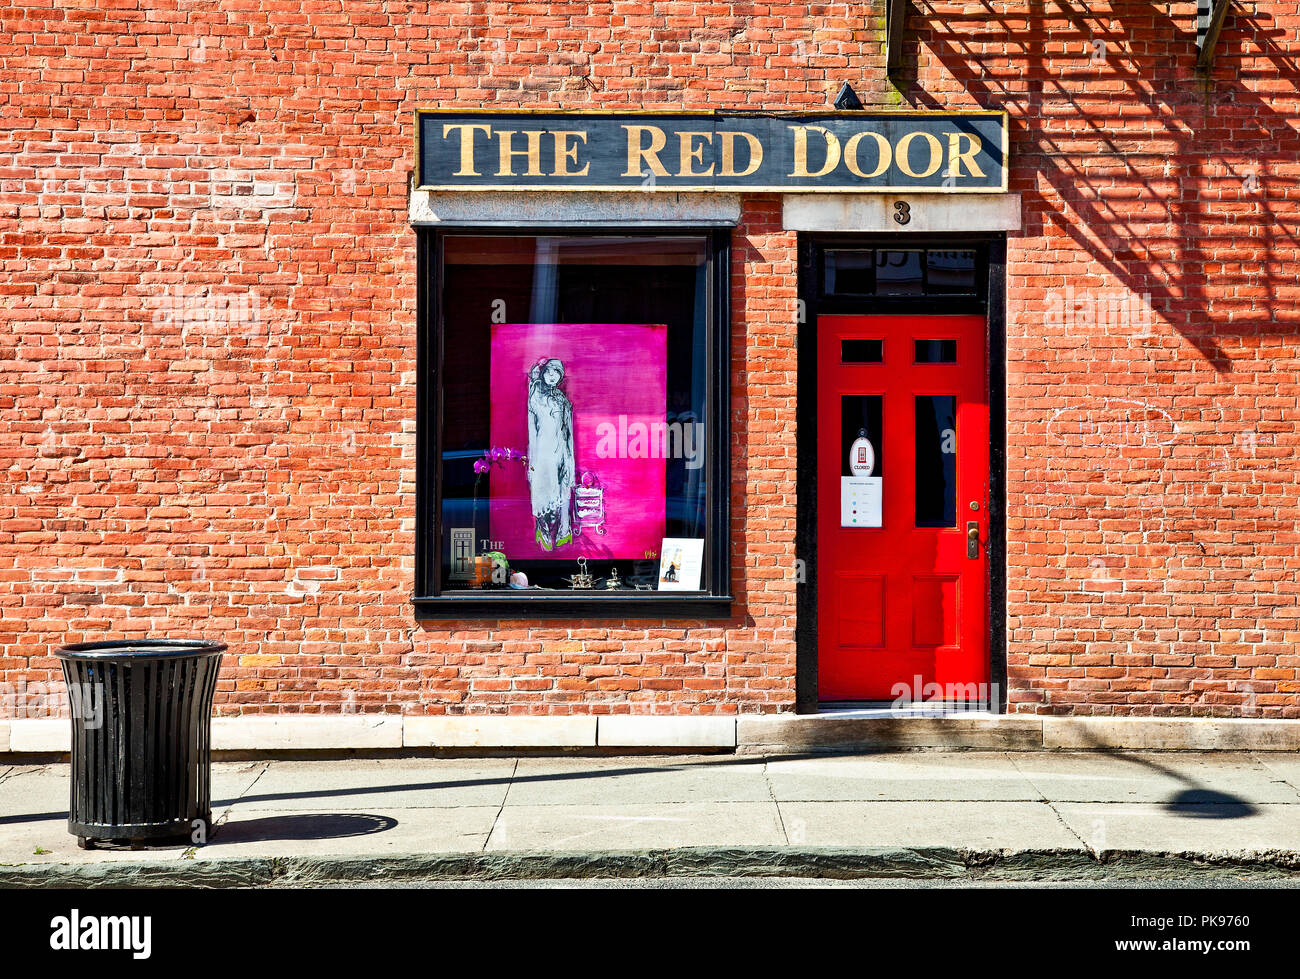 Red Door, a business in Great Barrington, MA Stock Photo